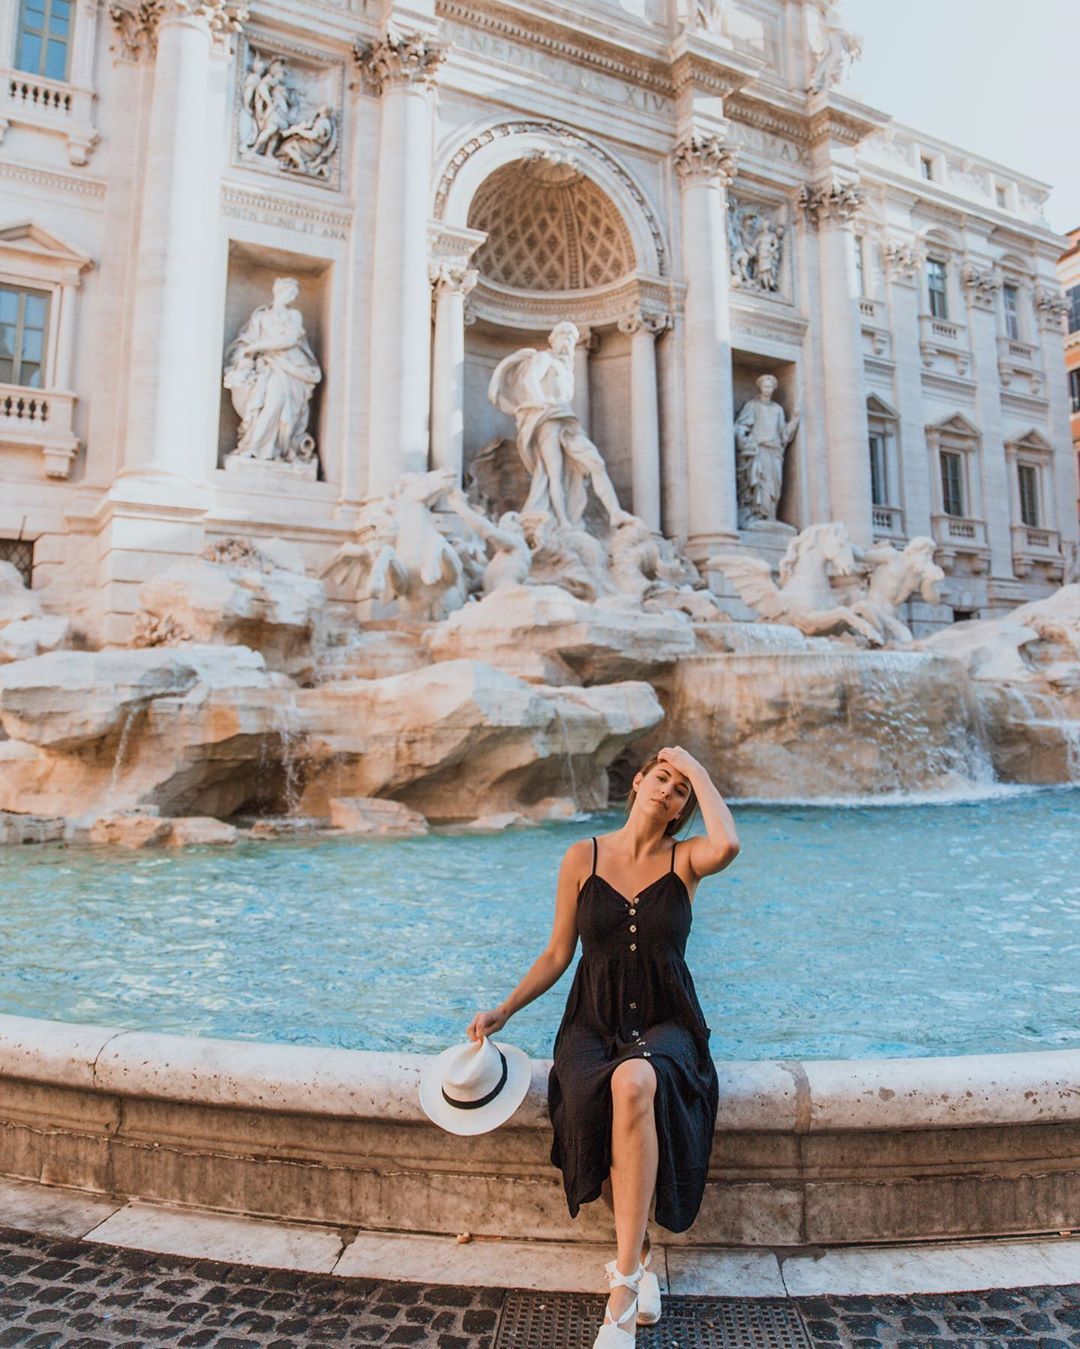 Dana BerezвњЁTravel & LifestyleвњЁ on Instagram: “рџЊ™ Early mornings at the Trevi. Let me tell you... if you have seen this beauty at 3 in the afternoon you KNOW it's packed with people. -->…” -   15 holiday Fashion italy ideas